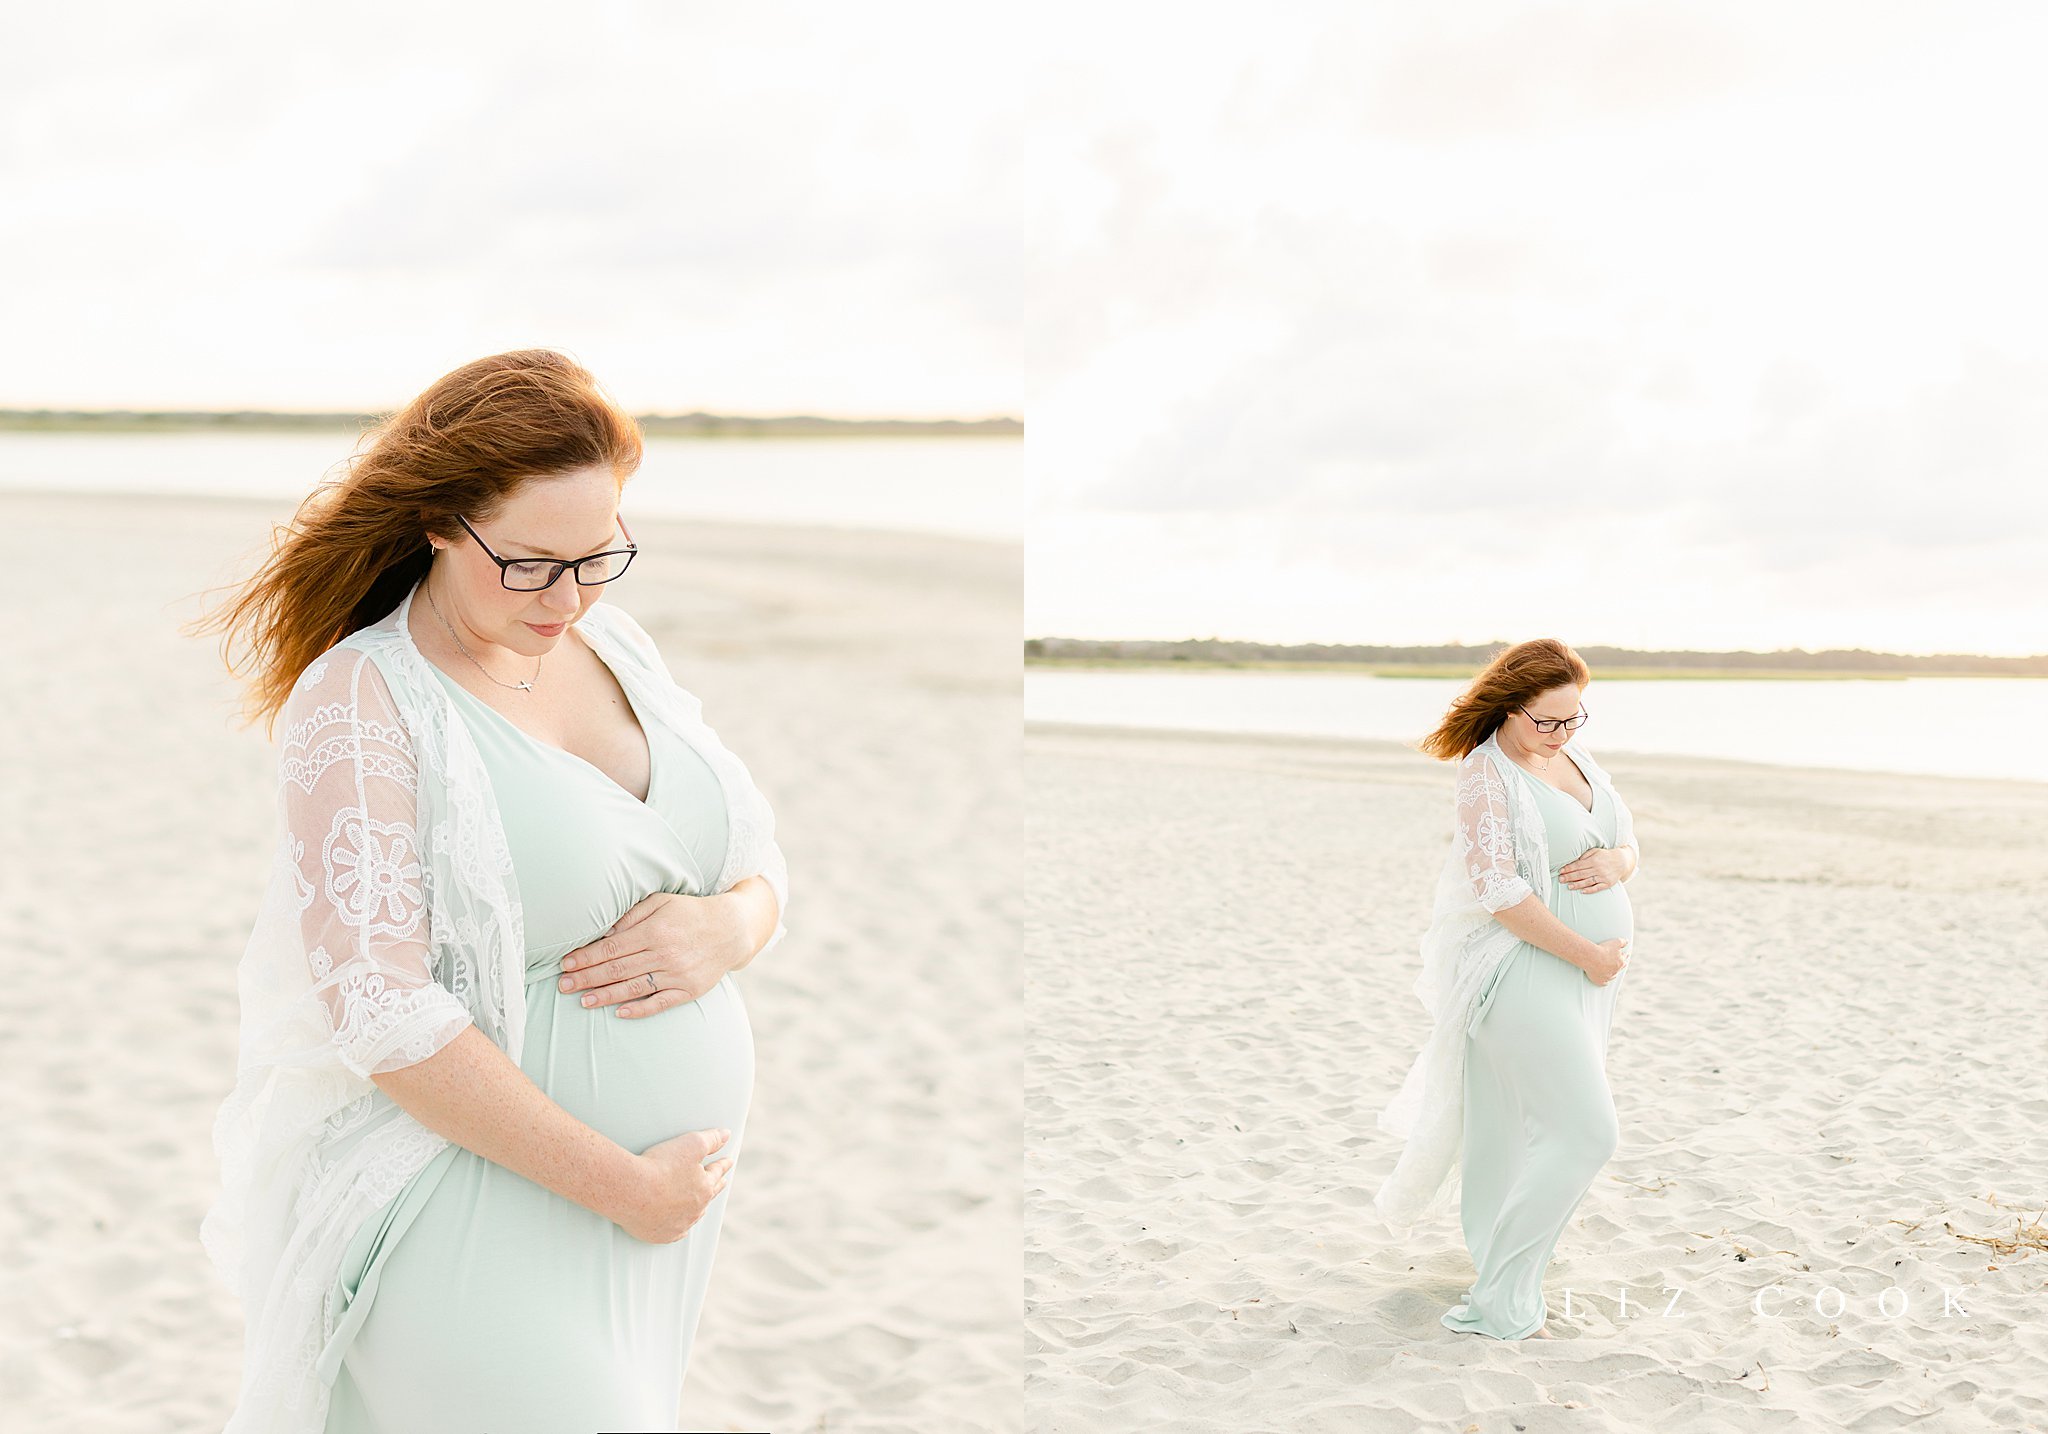 maternity-pictures-on-beach-liz-cook-photography-caroline-jean-photography_0004.jpg